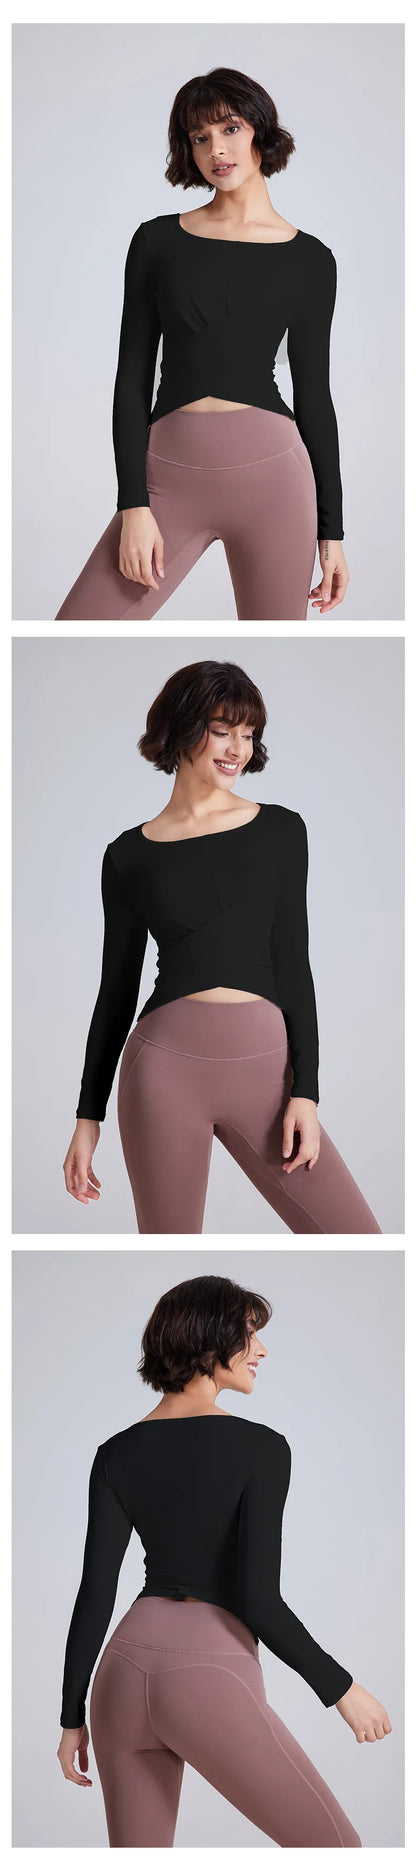 Stay Stylish and Comfortable: Cross Button Pilates-Ready Top